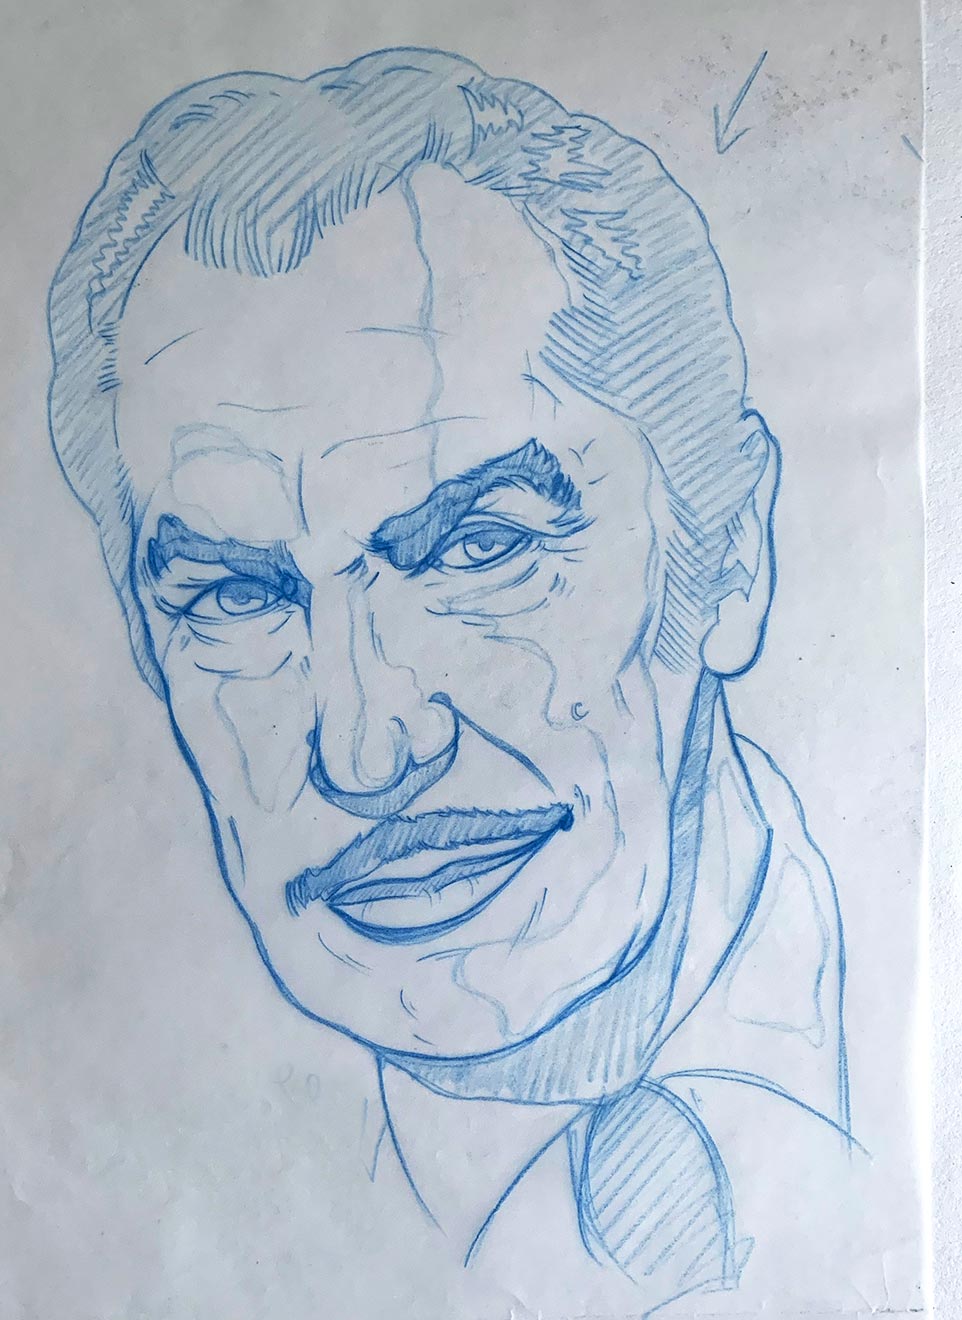 Vincent Price - Icons of Horror